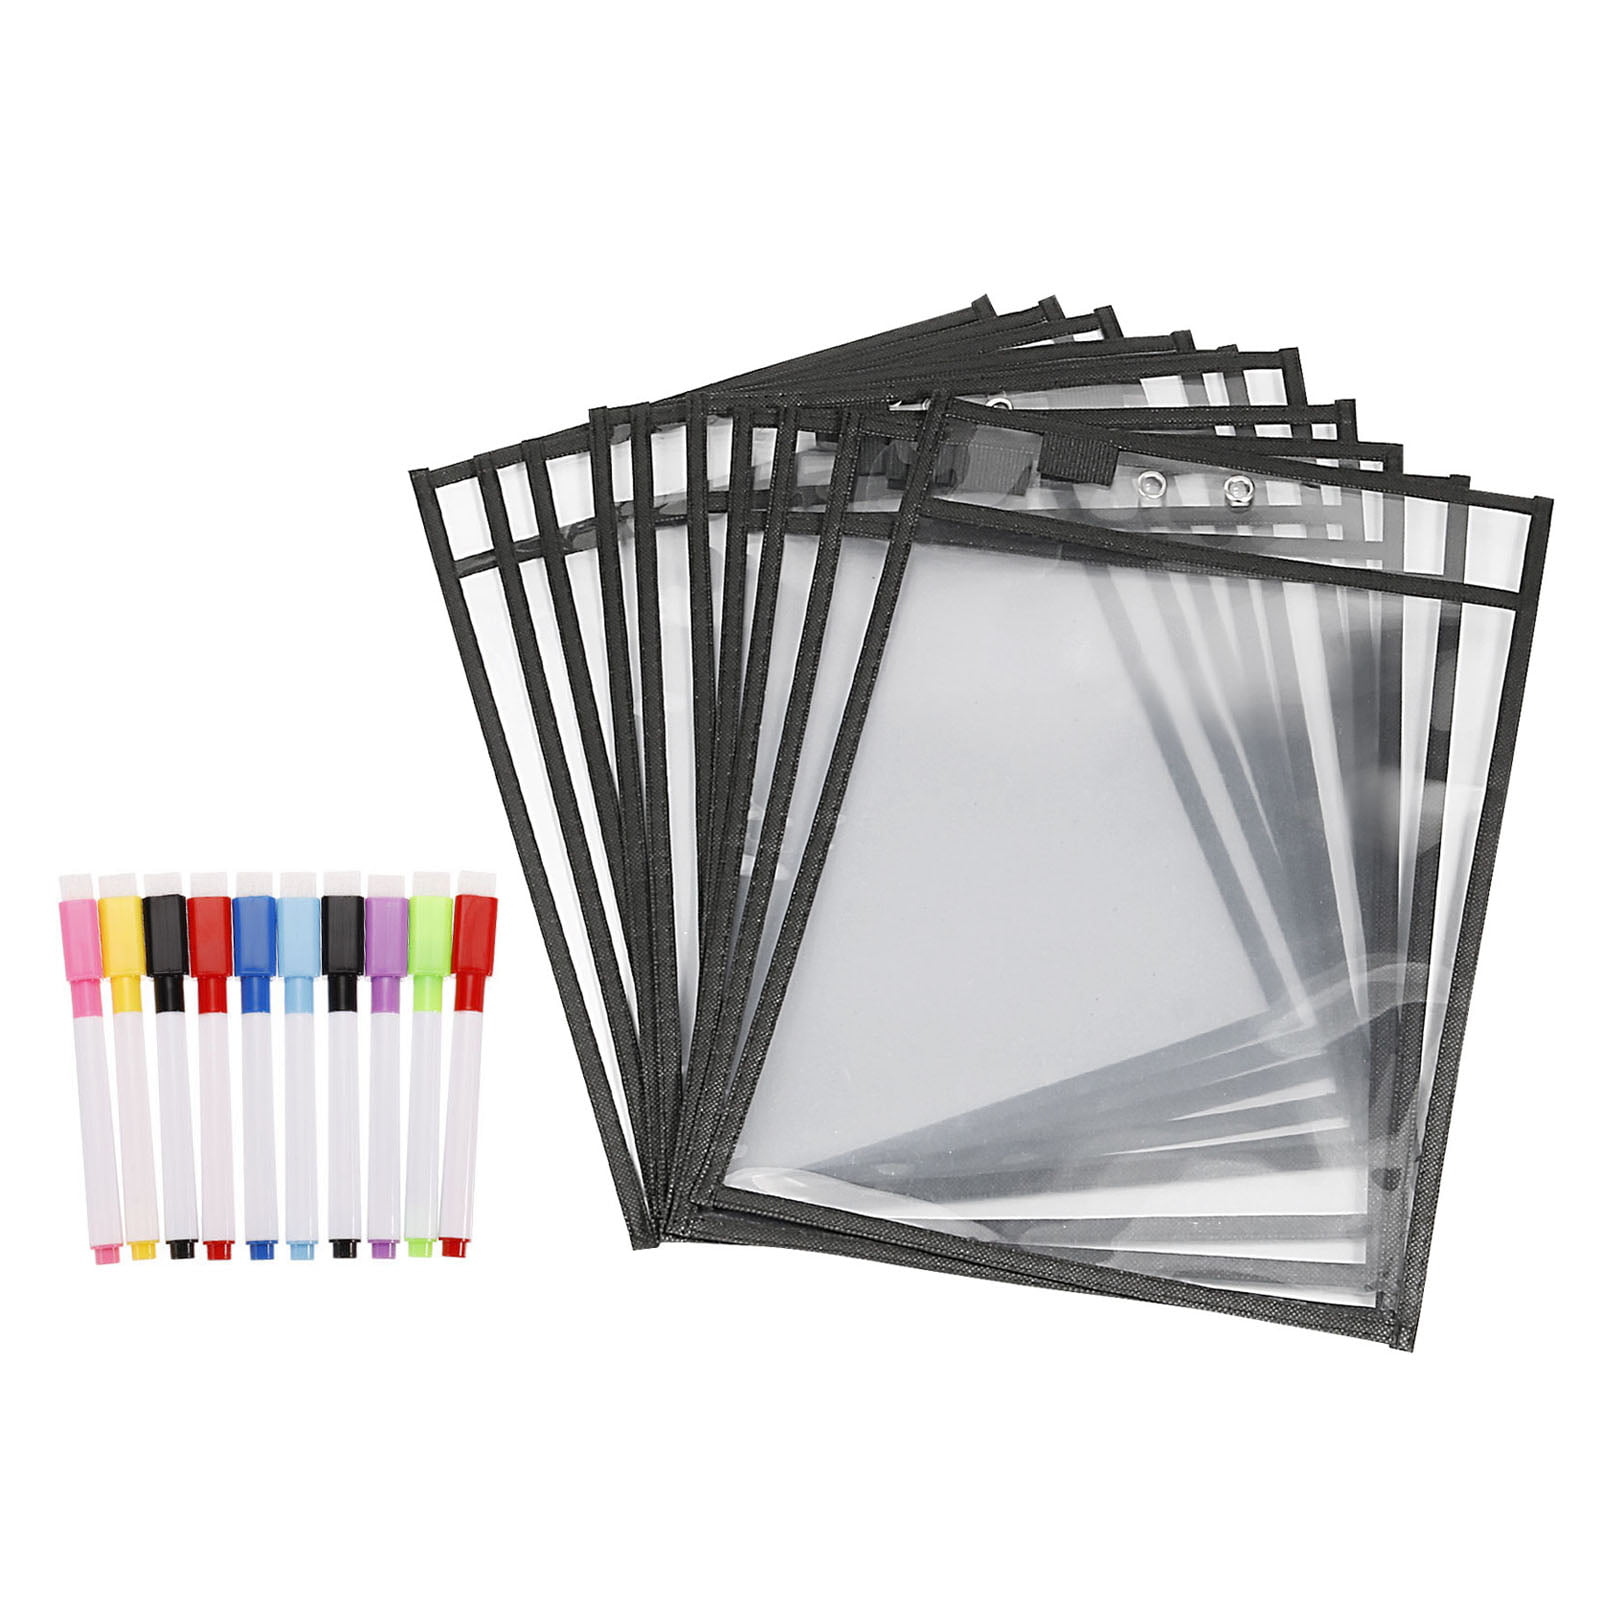 INFUN Dry Erase Pockets - 20 Pack,Oversized Reusable Dry Erase Sleeves,  Multicolored Dry Erase Pocket Sleeves with 20 Markers 4 Eraser 2 Metal  Rings